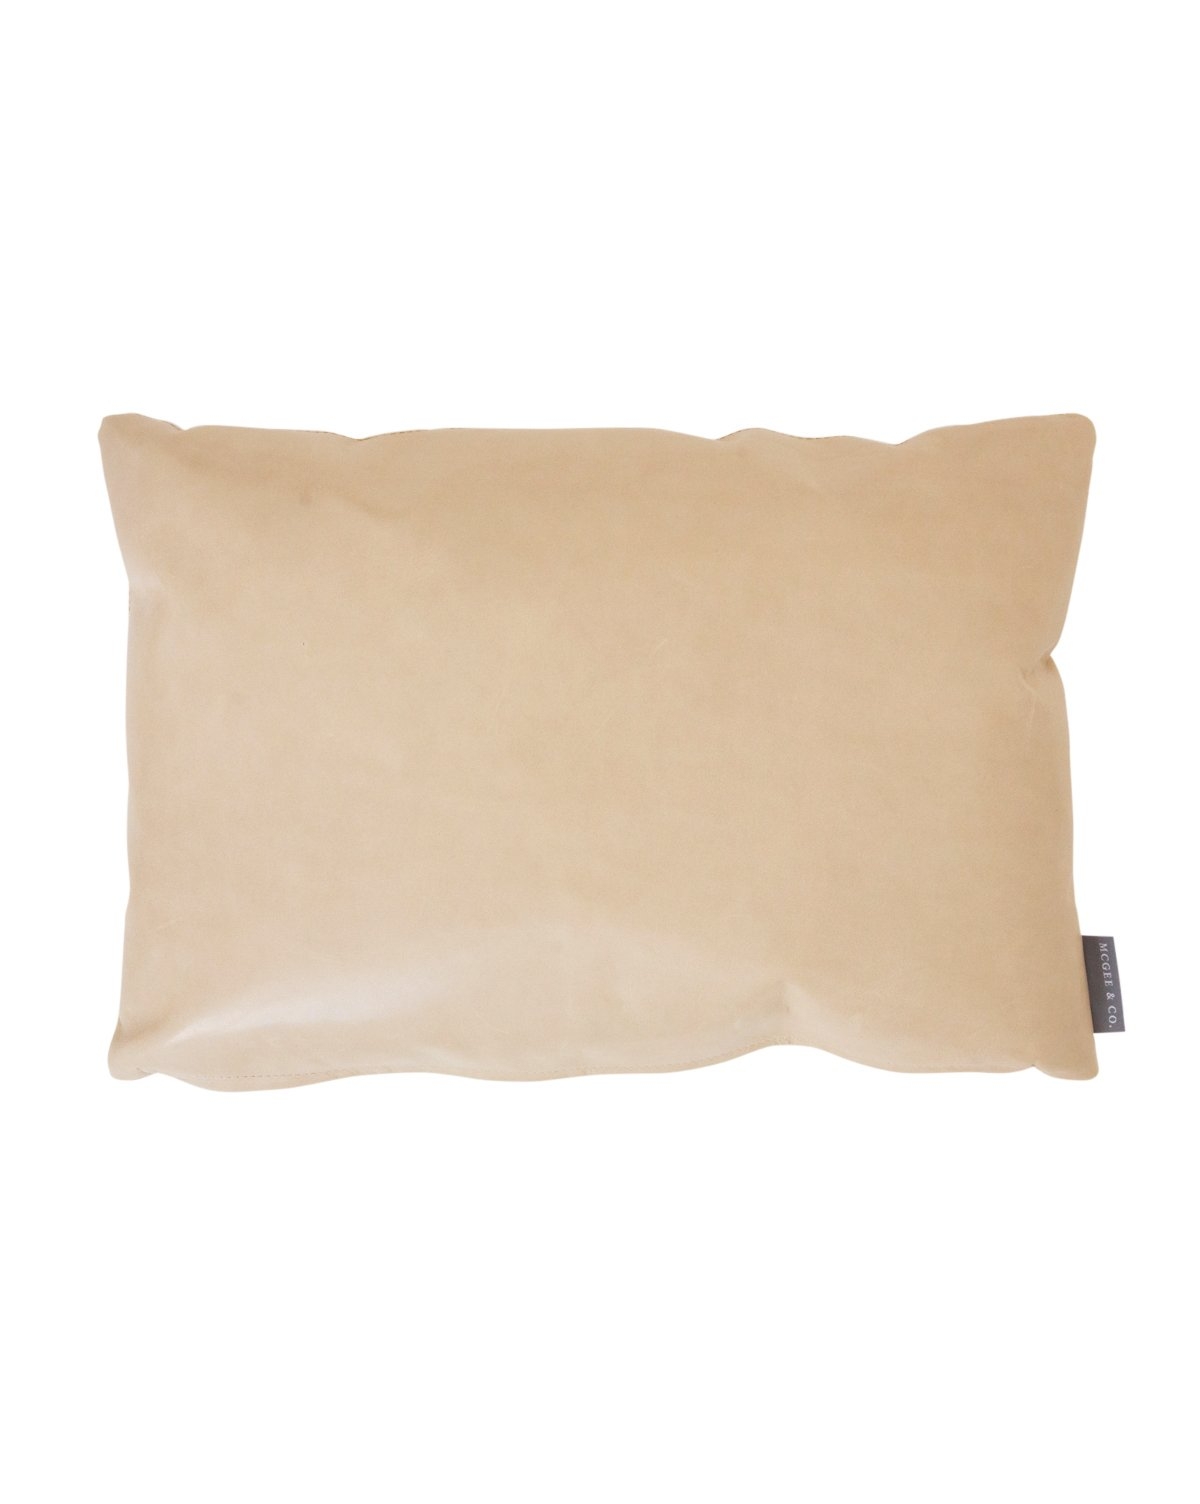 PALOMINO LEATHER PILLOW COVER WITH DOWN INSERT, 14" x 20" - Image 0